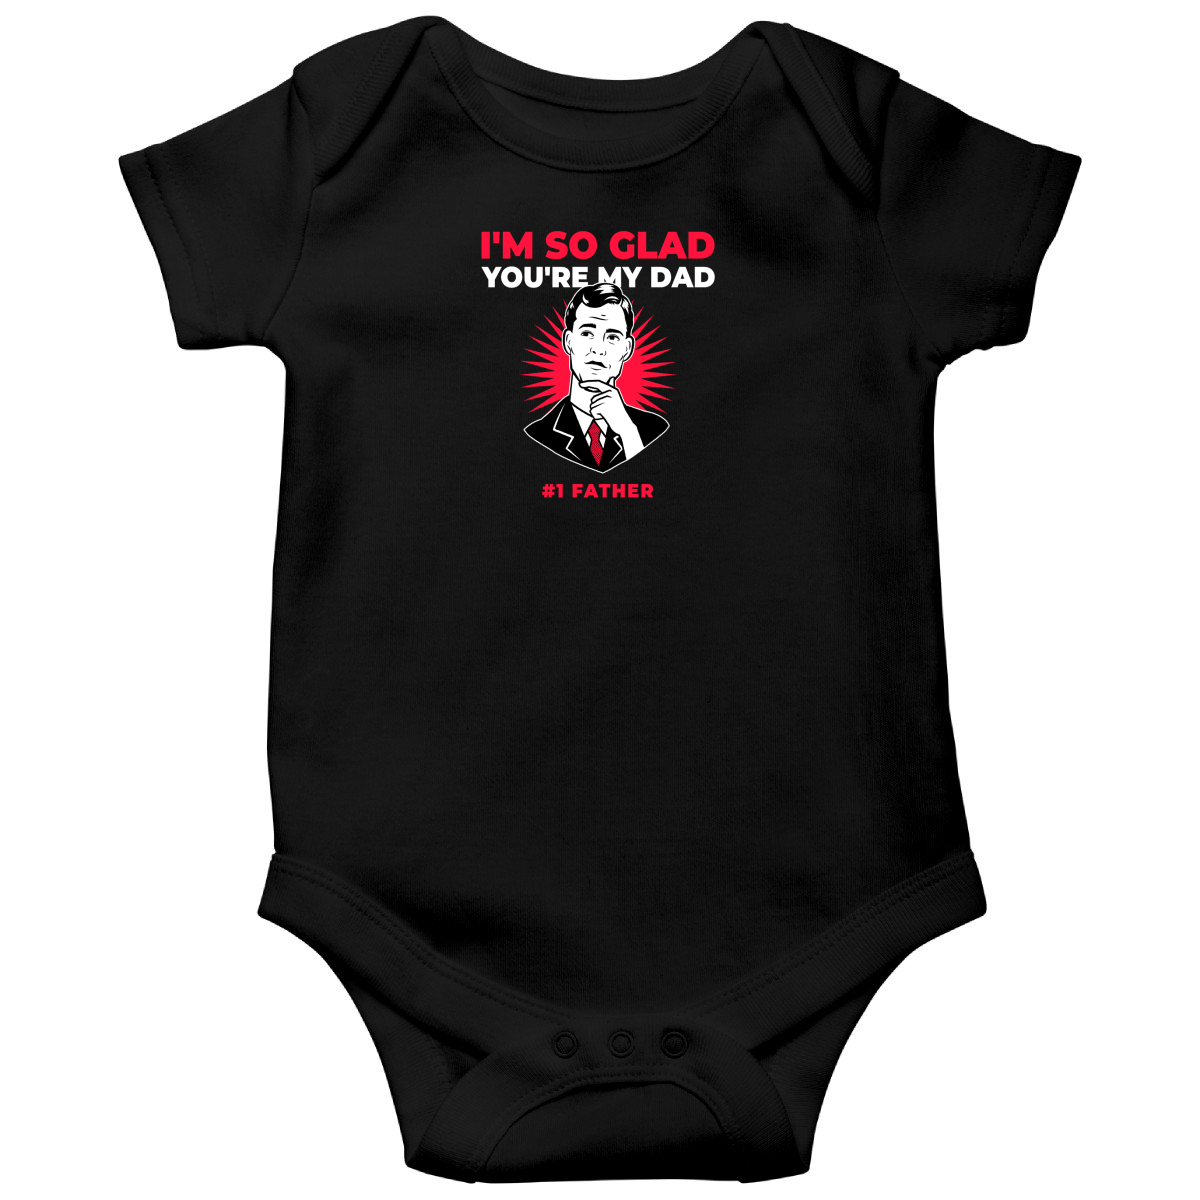 I'm so glad you are my dad Baby Bodysuits | Black